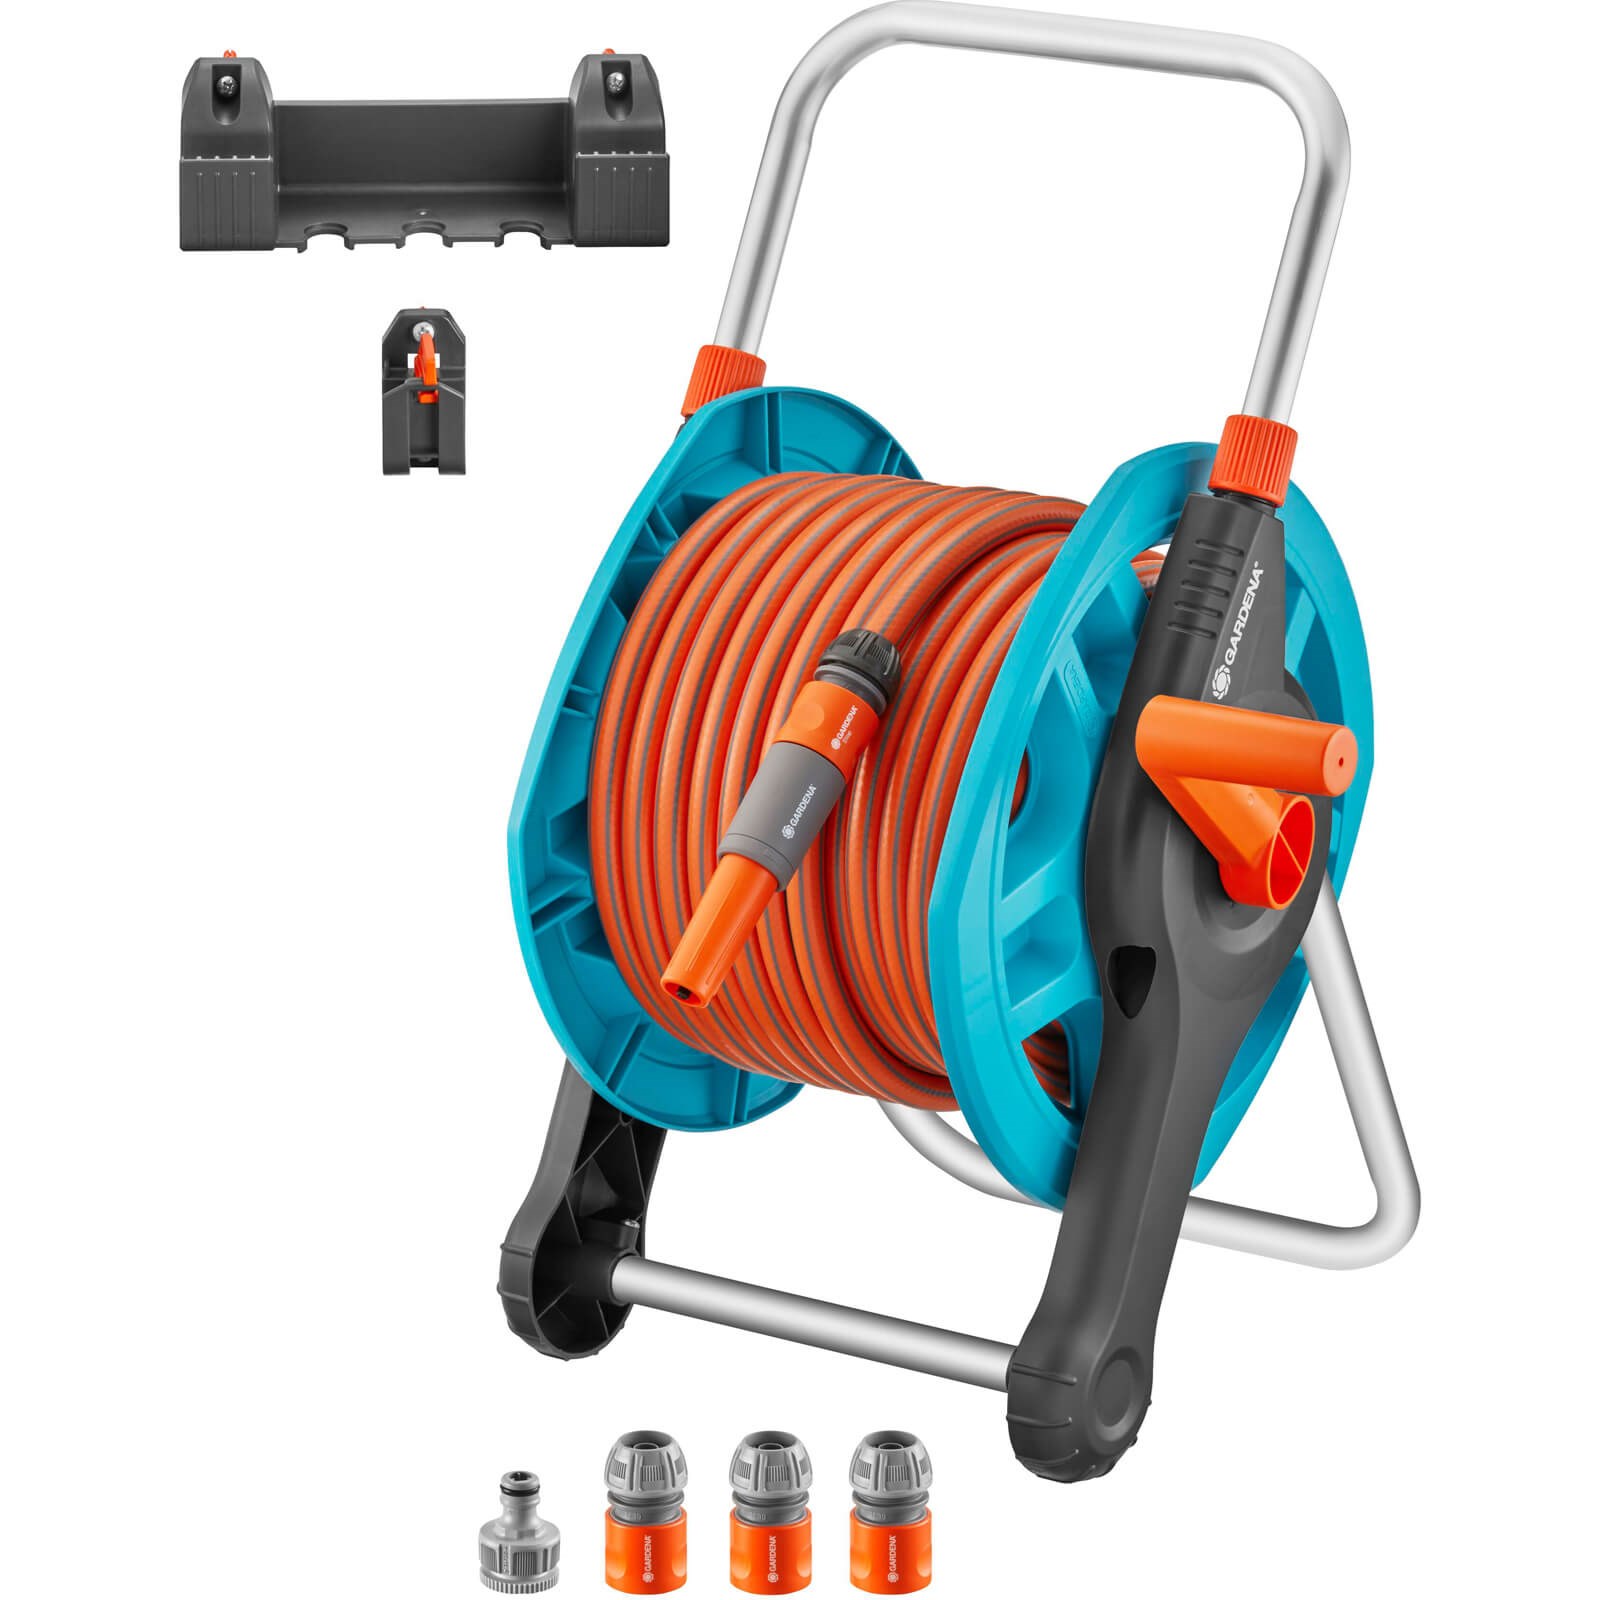 Garden Hose Reel, Hose Reel for Wall Mounting, Hose Reel, Hose Box with 20  M Hose, Garden Hose, Wall Hose Reel with Automatic Reel